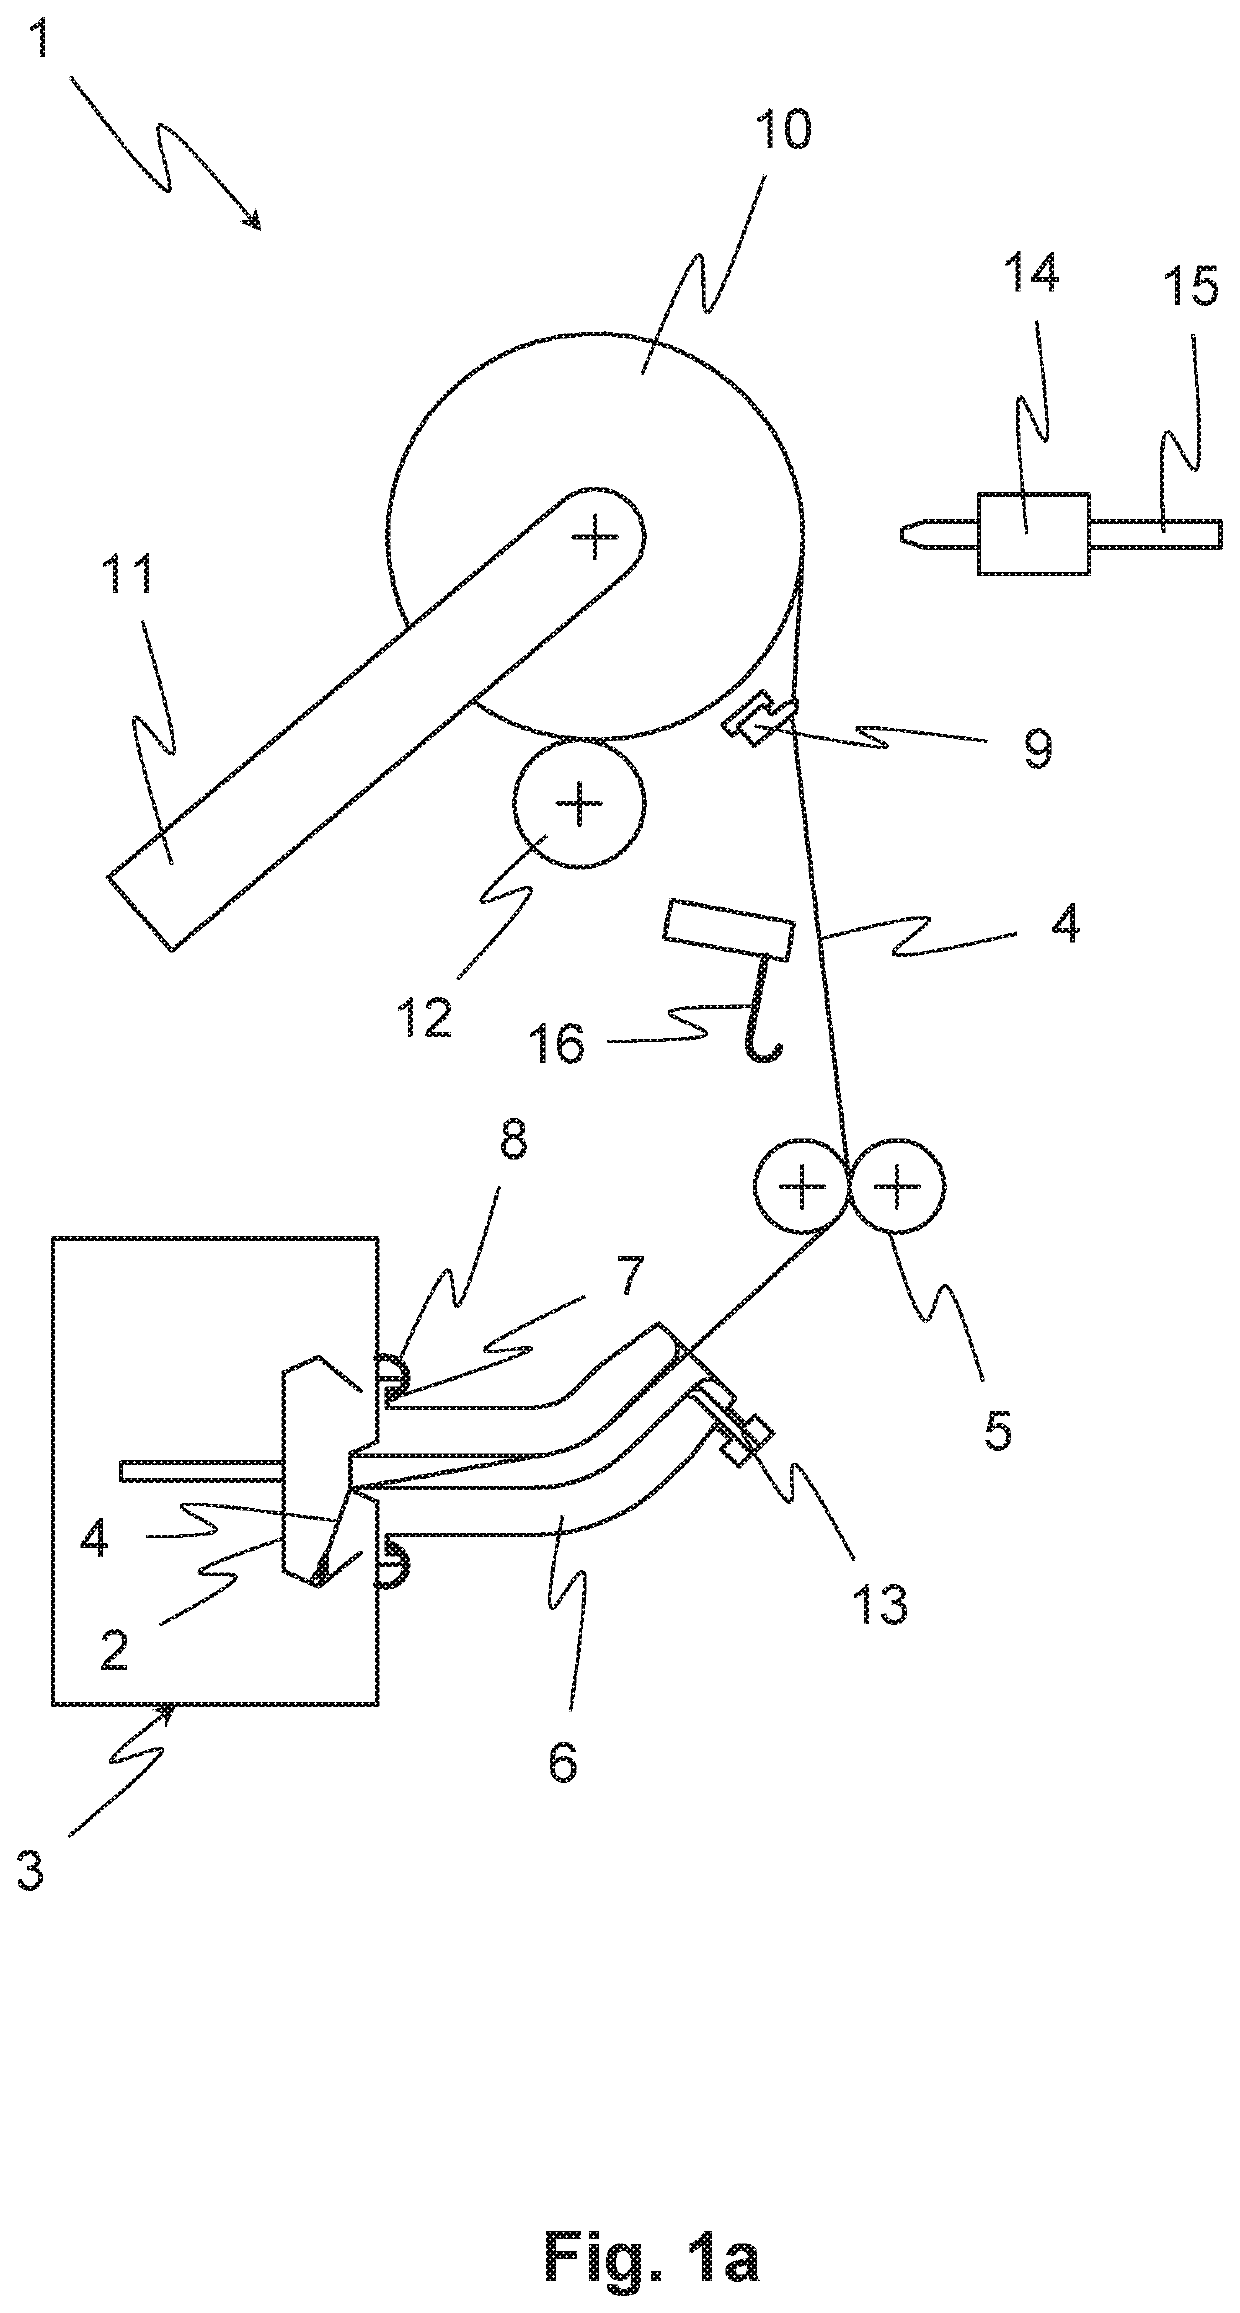 Thread-guiding unit, open-end spinning machine and method for operating a spinning station